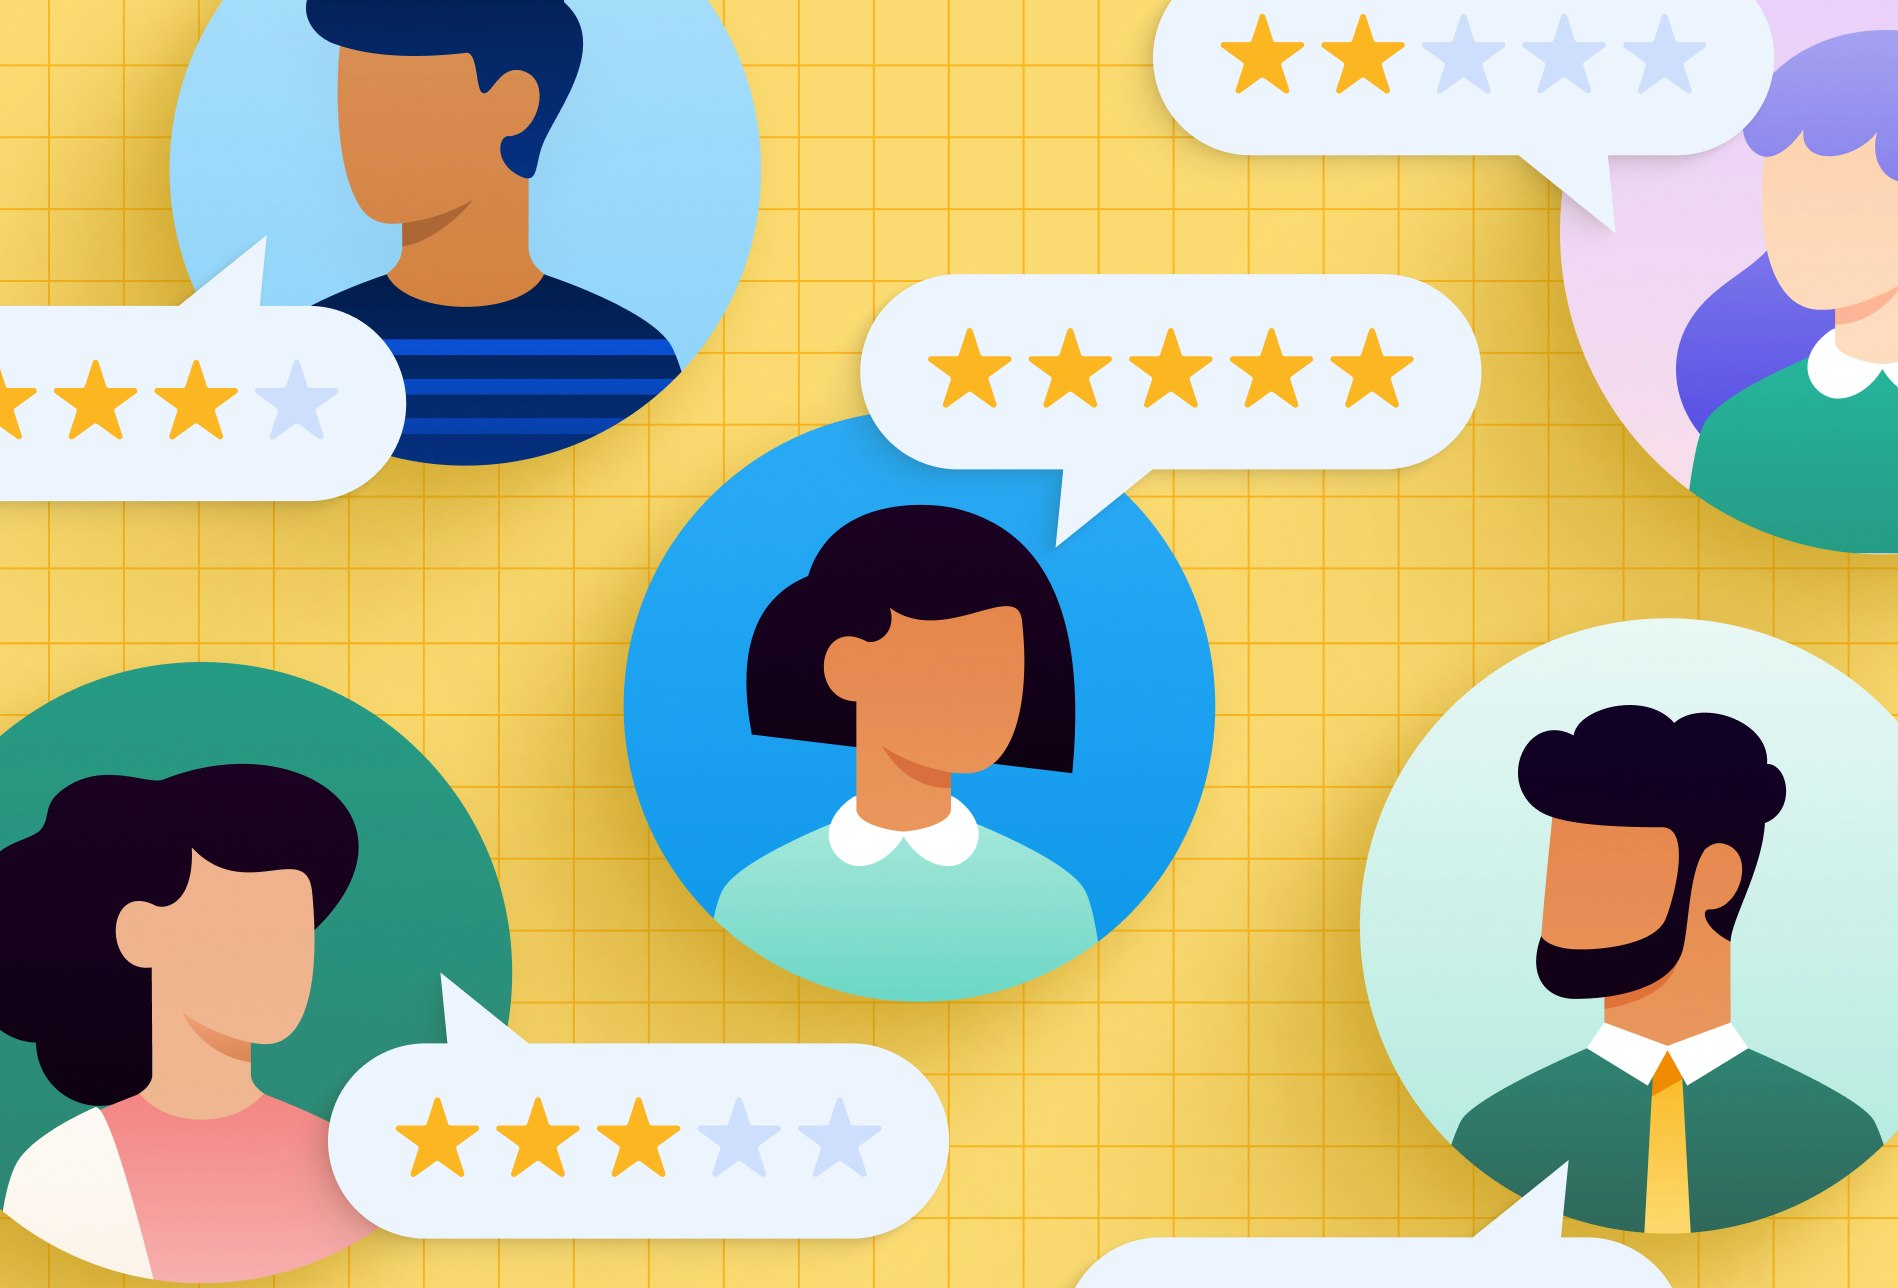 How poor delivery experience impacts online customer behavior: A group of illustrated profile pictures with speech bubbles showing star reviews